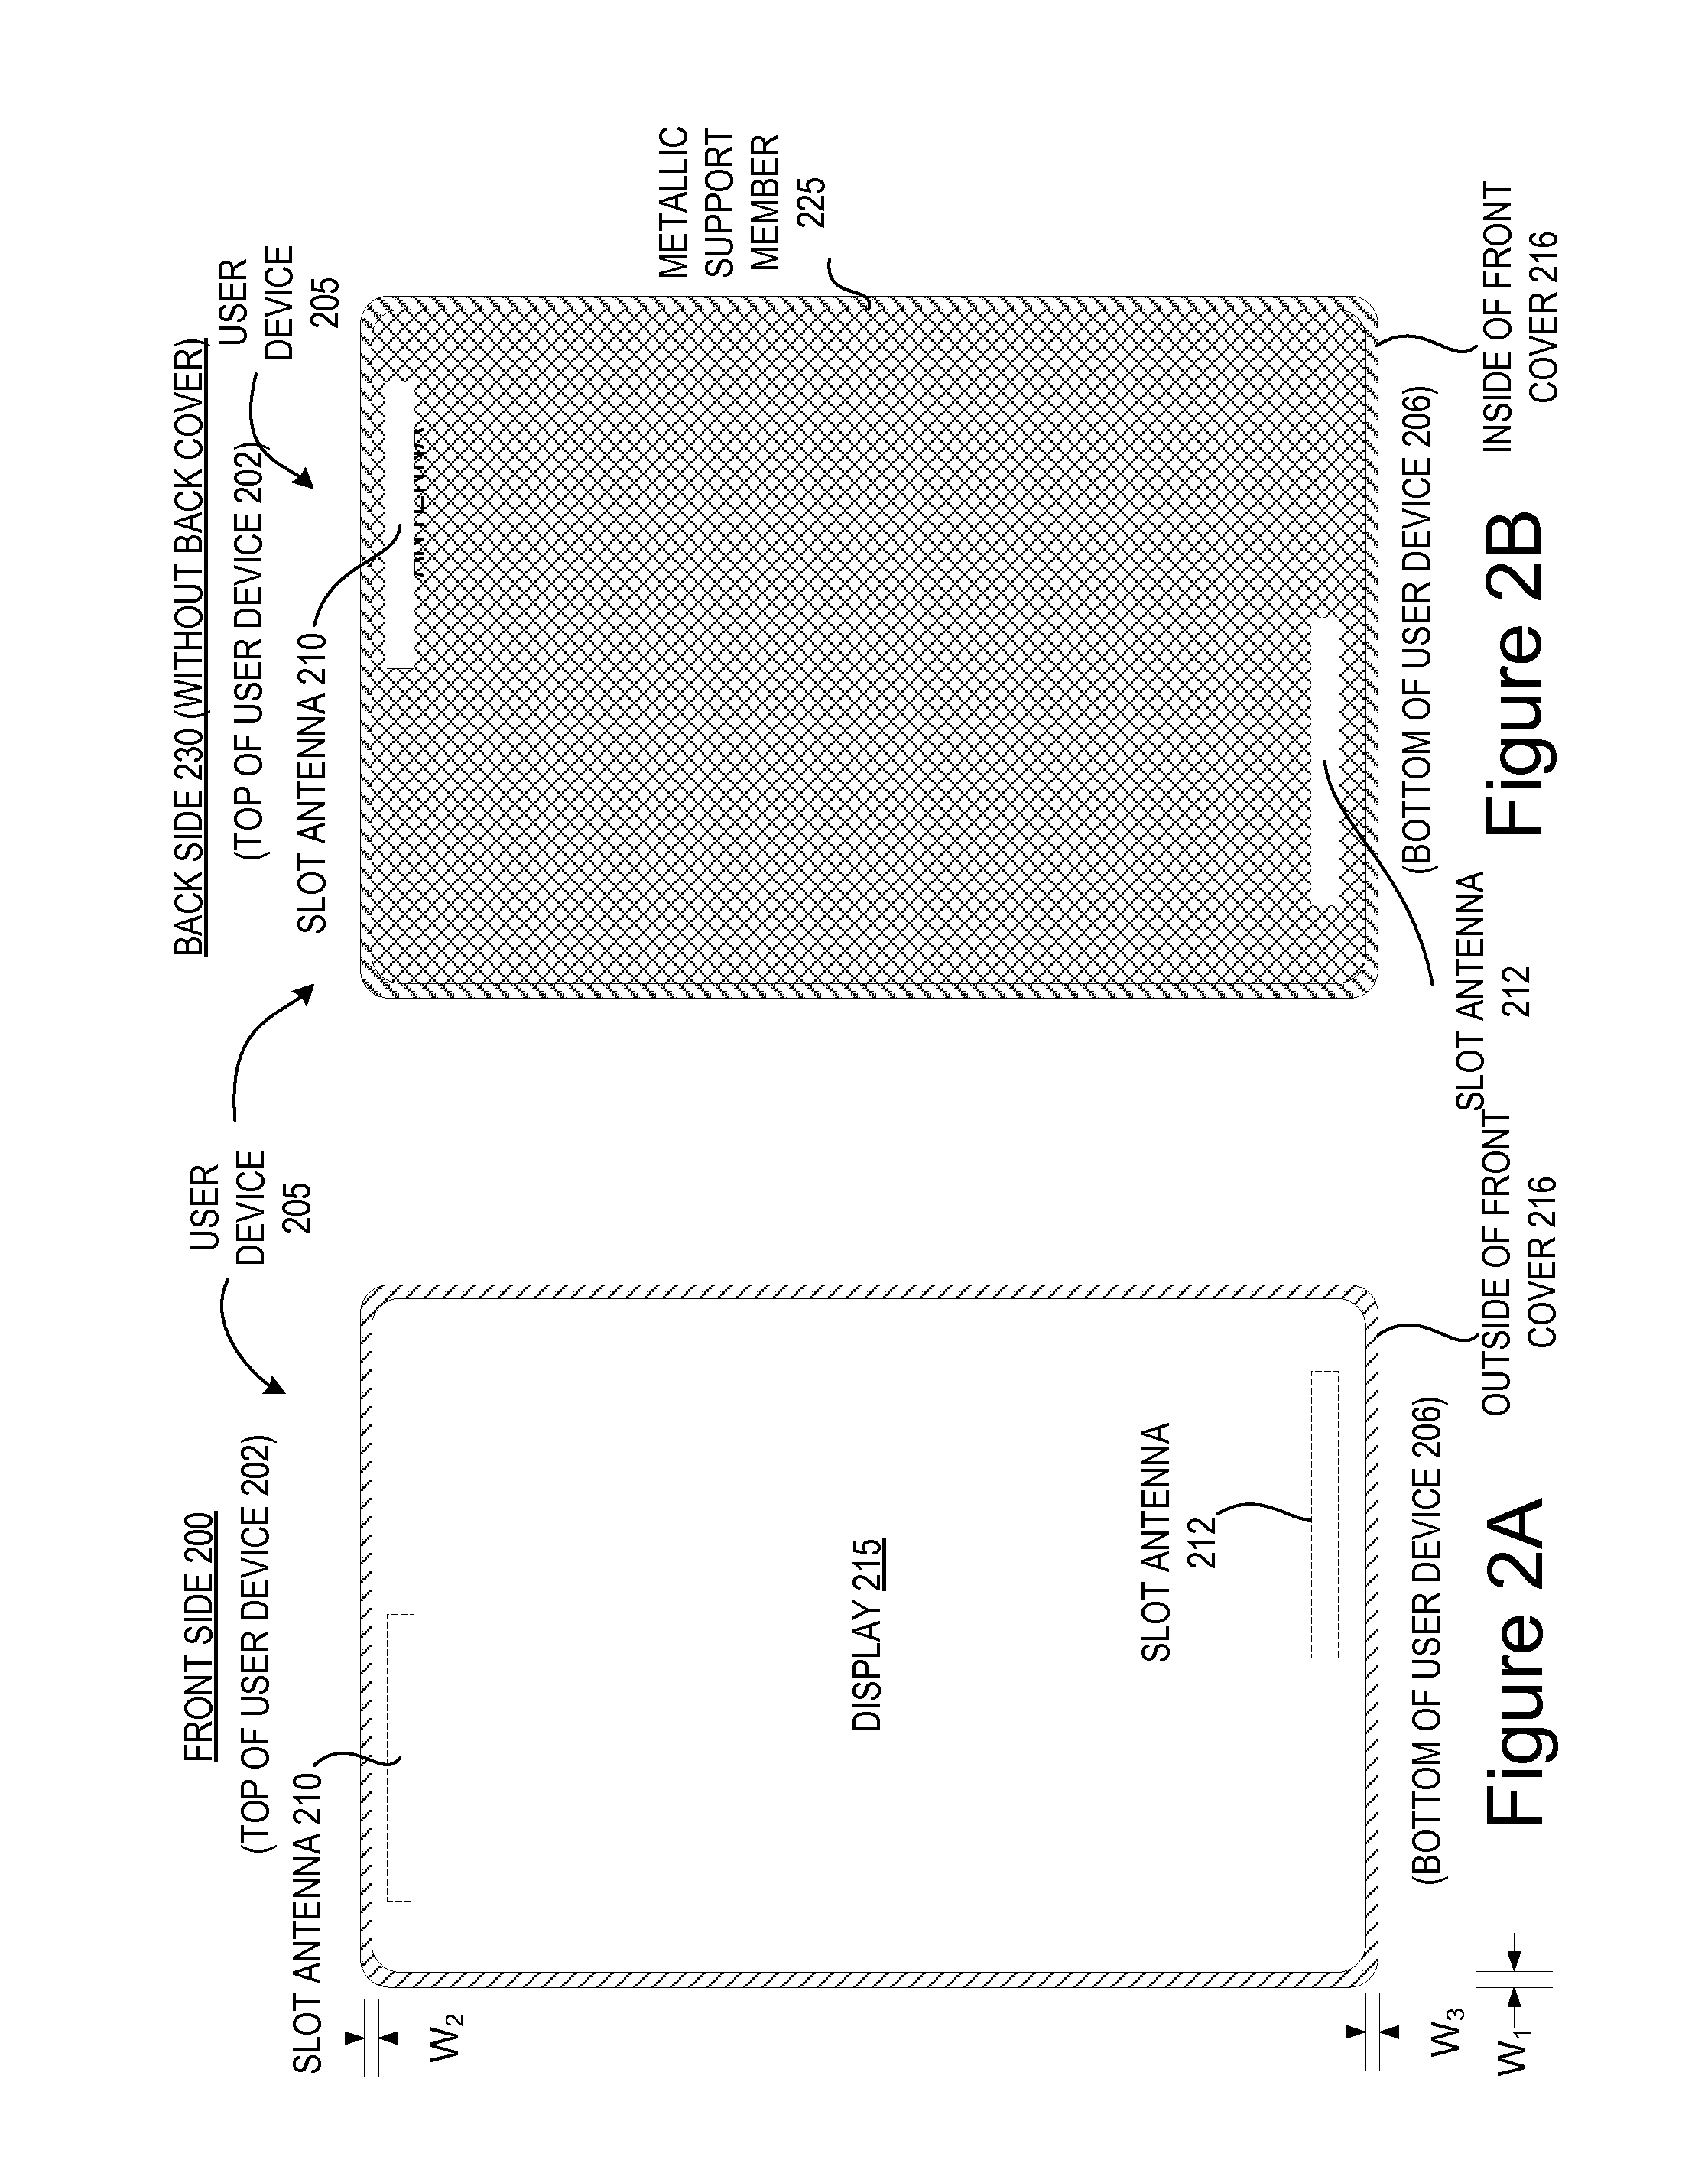 Slot antenna within existing device component